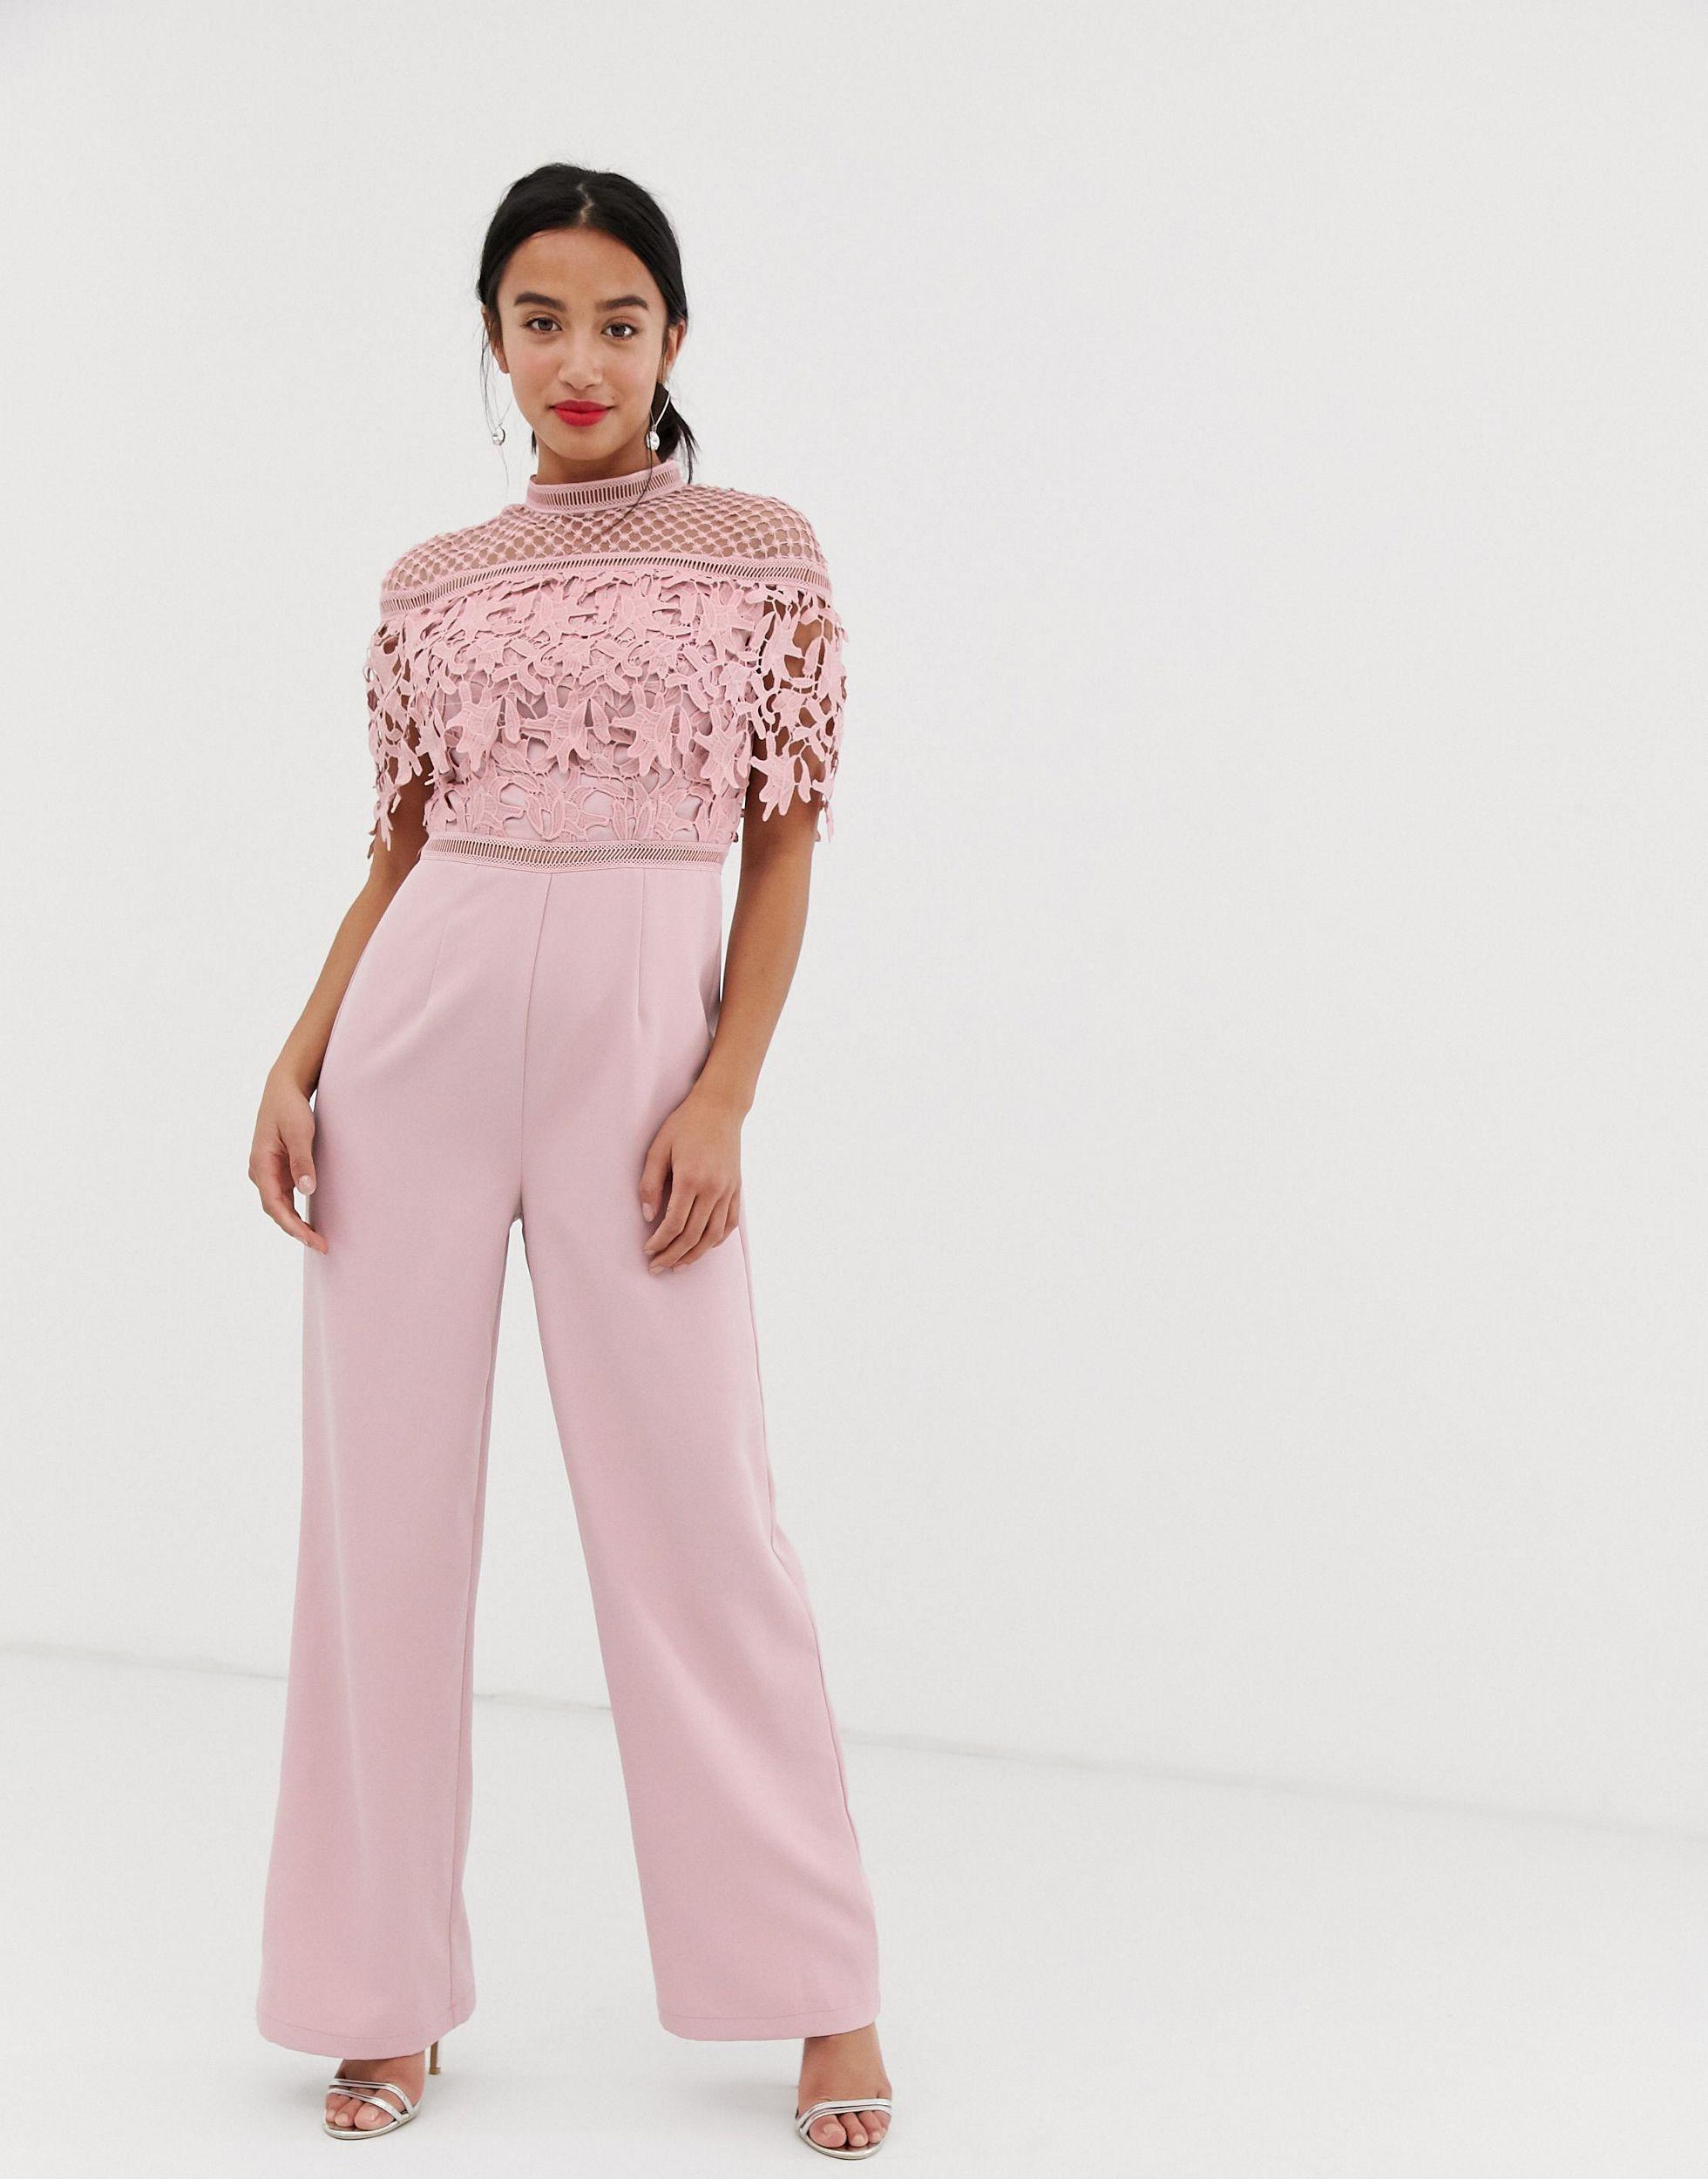 Chi Chi London High Neck Lace Top Jumpsuit in Pink | Lyst